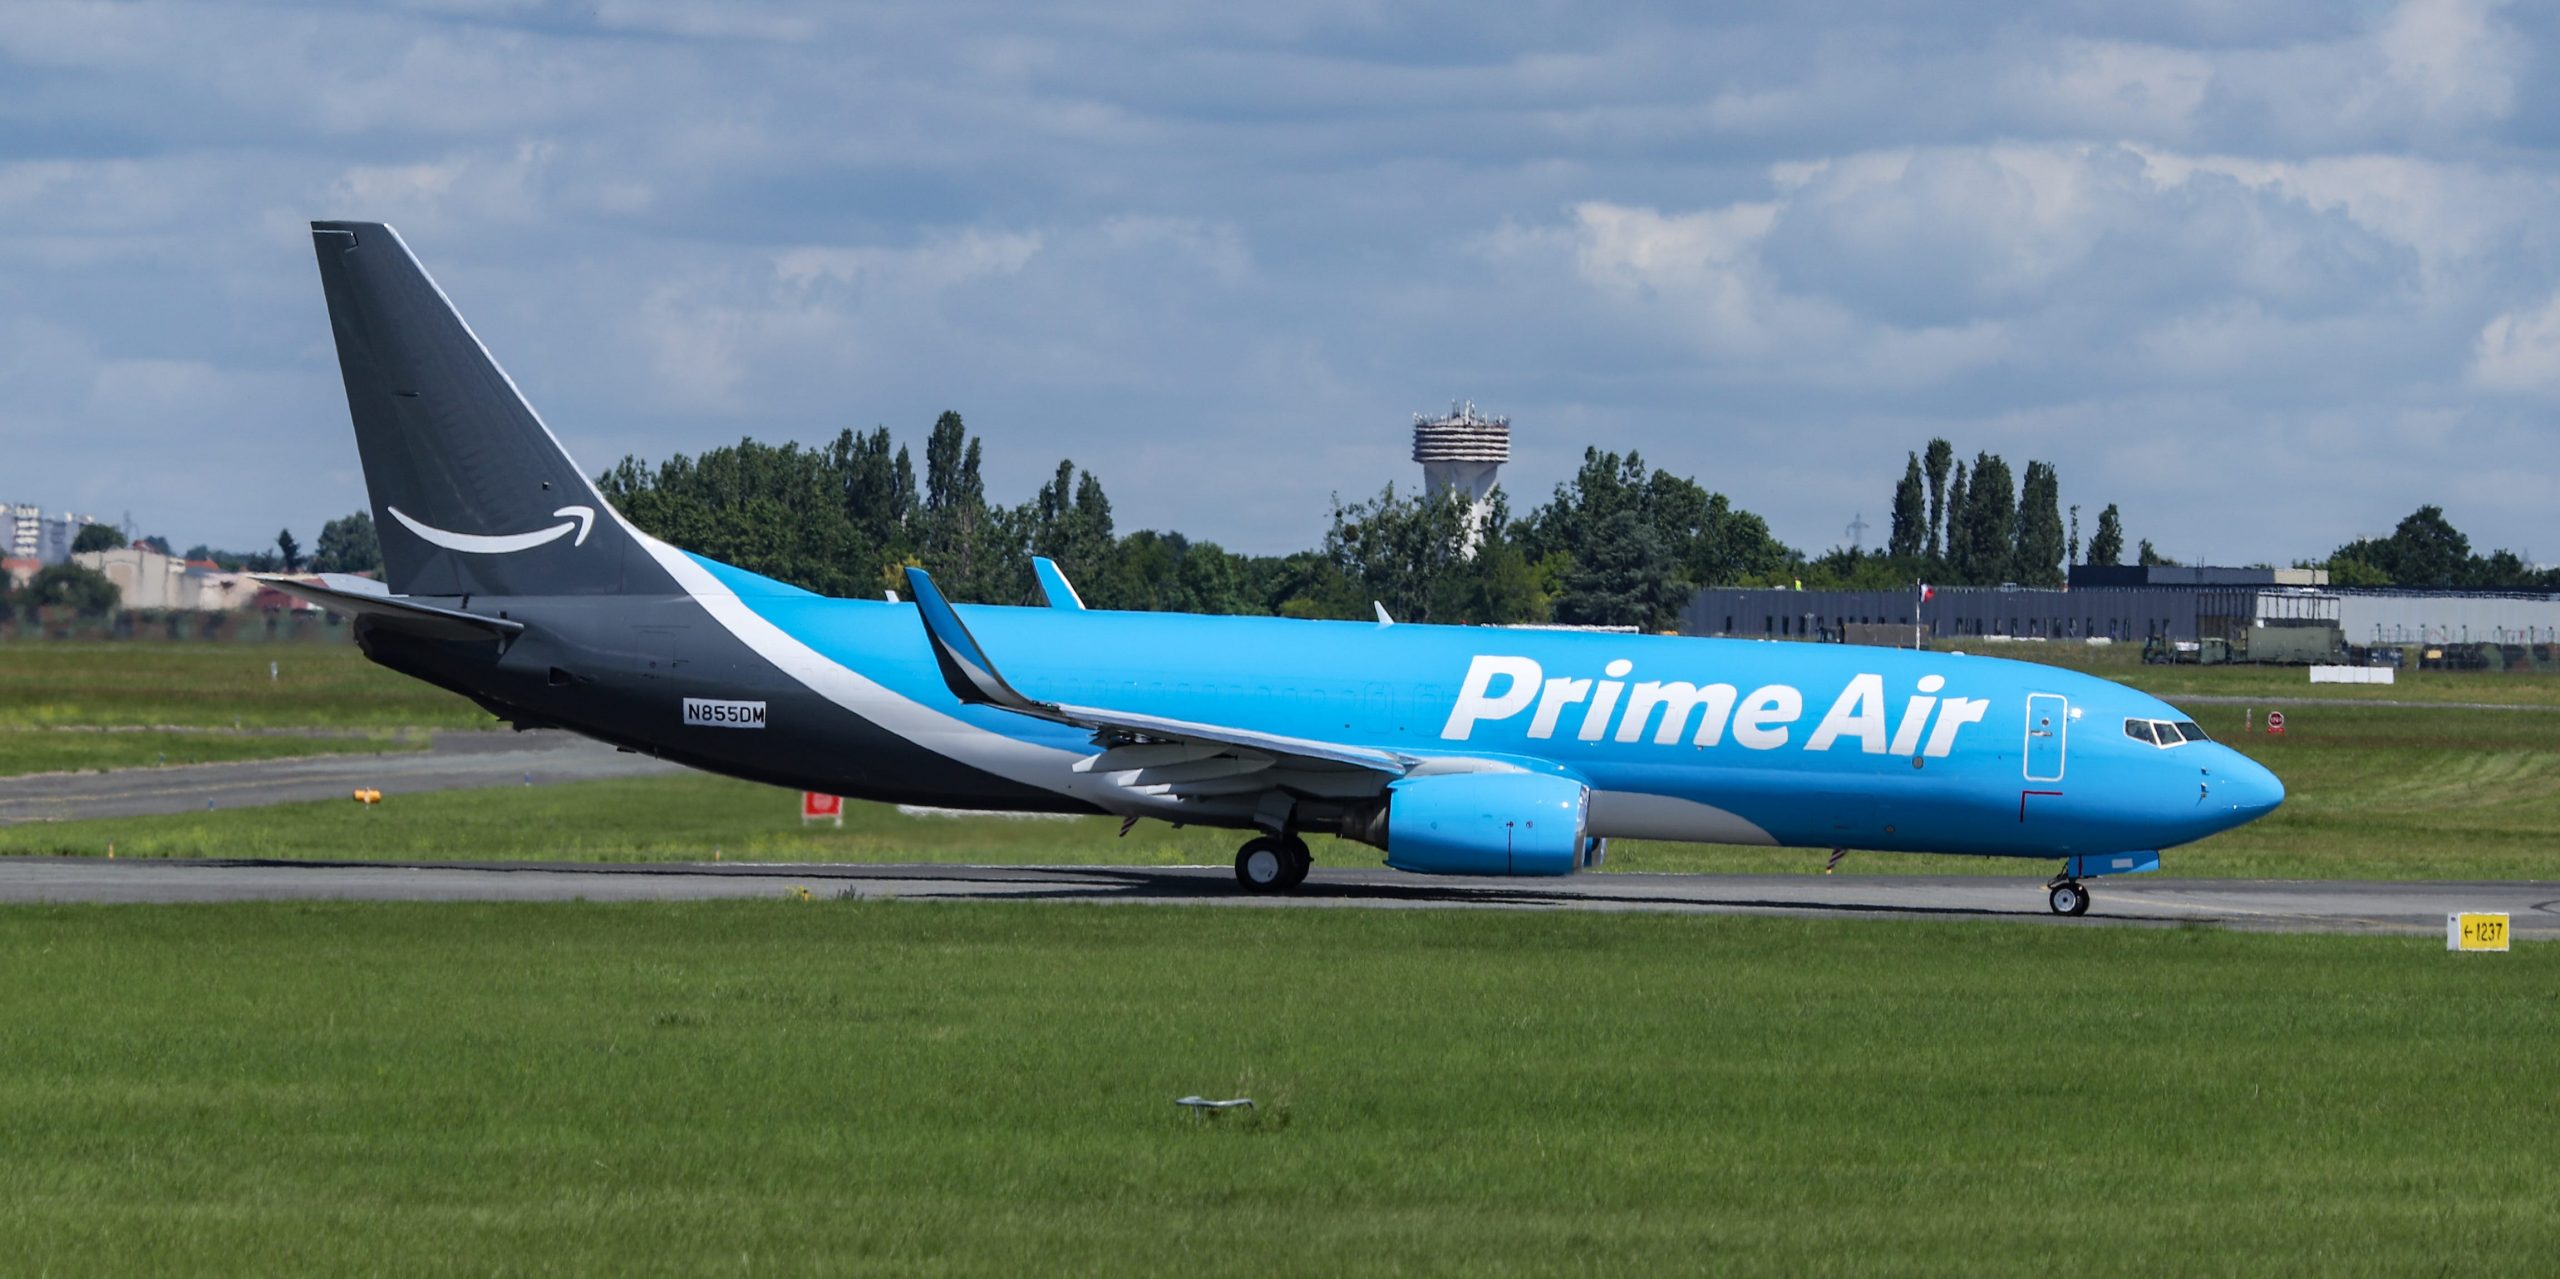 Amazon Air is a cargo airline brand for Amazon freight delivery service based in Seattle, Washington.